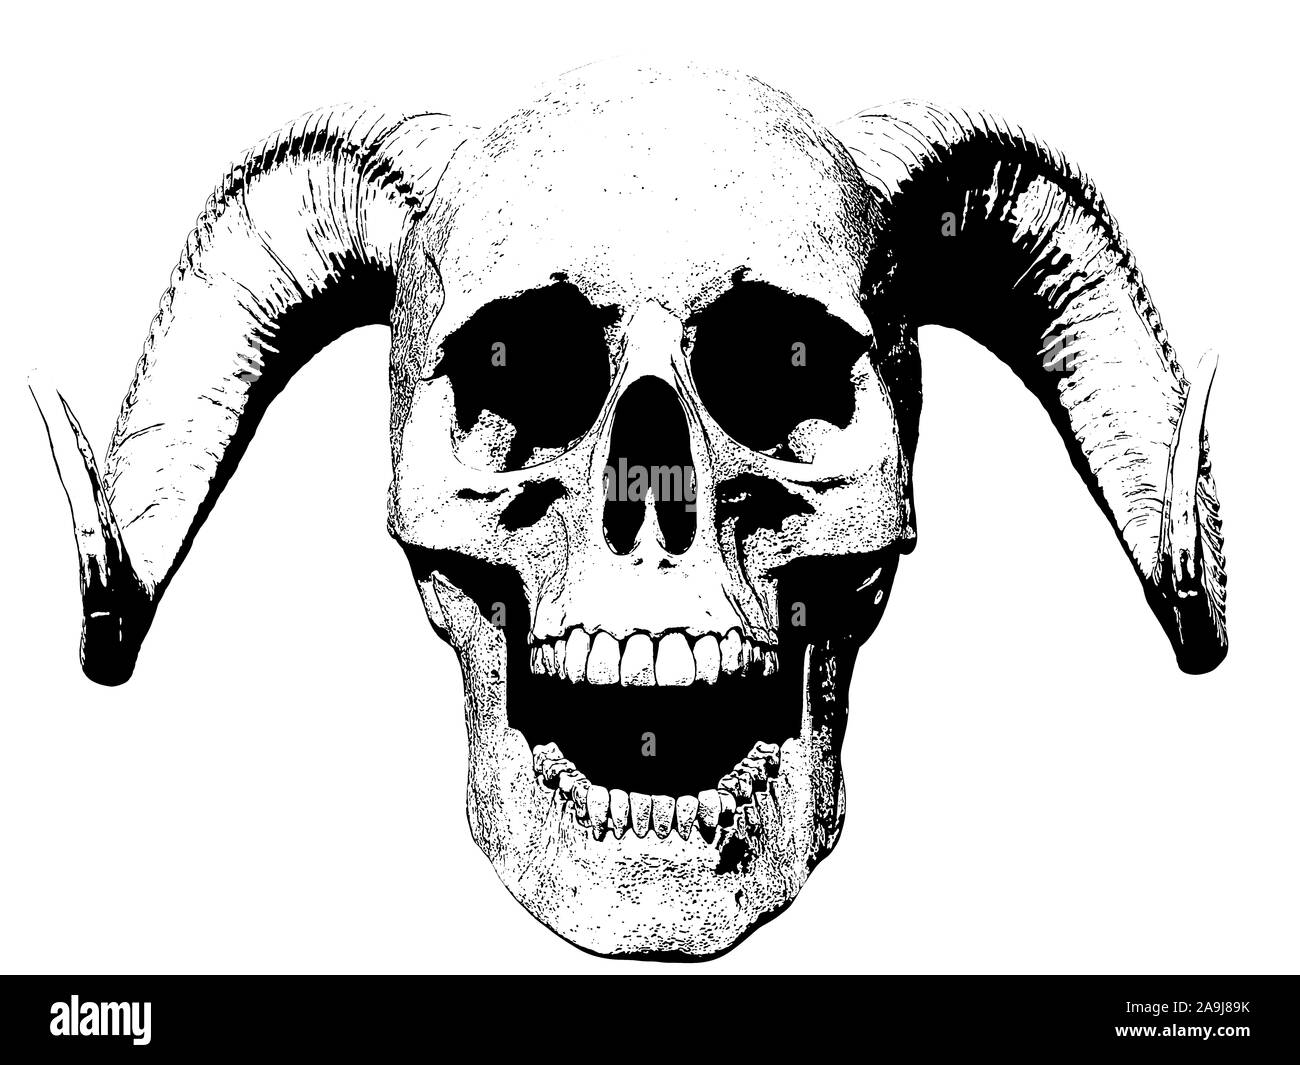 Skull screaming illustration isolated in background 3d render Stock Photo -  Alamy